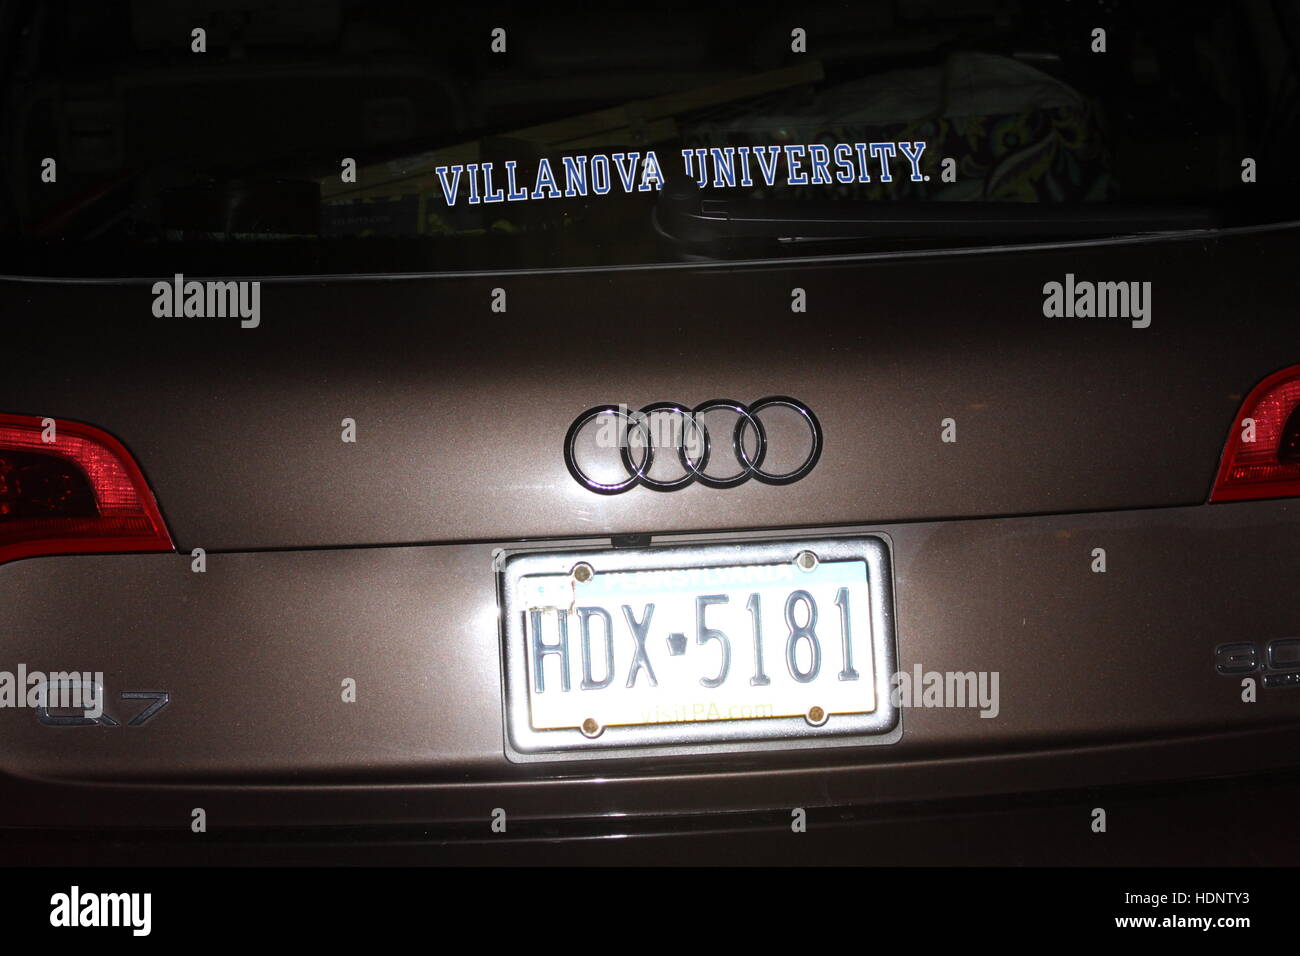 Villanova University sticker in the rear window of a car at the Radnor Hotel in Wayne, Pennsylvania, where Madeleine Albright, former United States Secretary of State, was campaigning for Hilary Clinton.  Where: Wayne, Pennsylvania, United States When: 16 Stock Photo